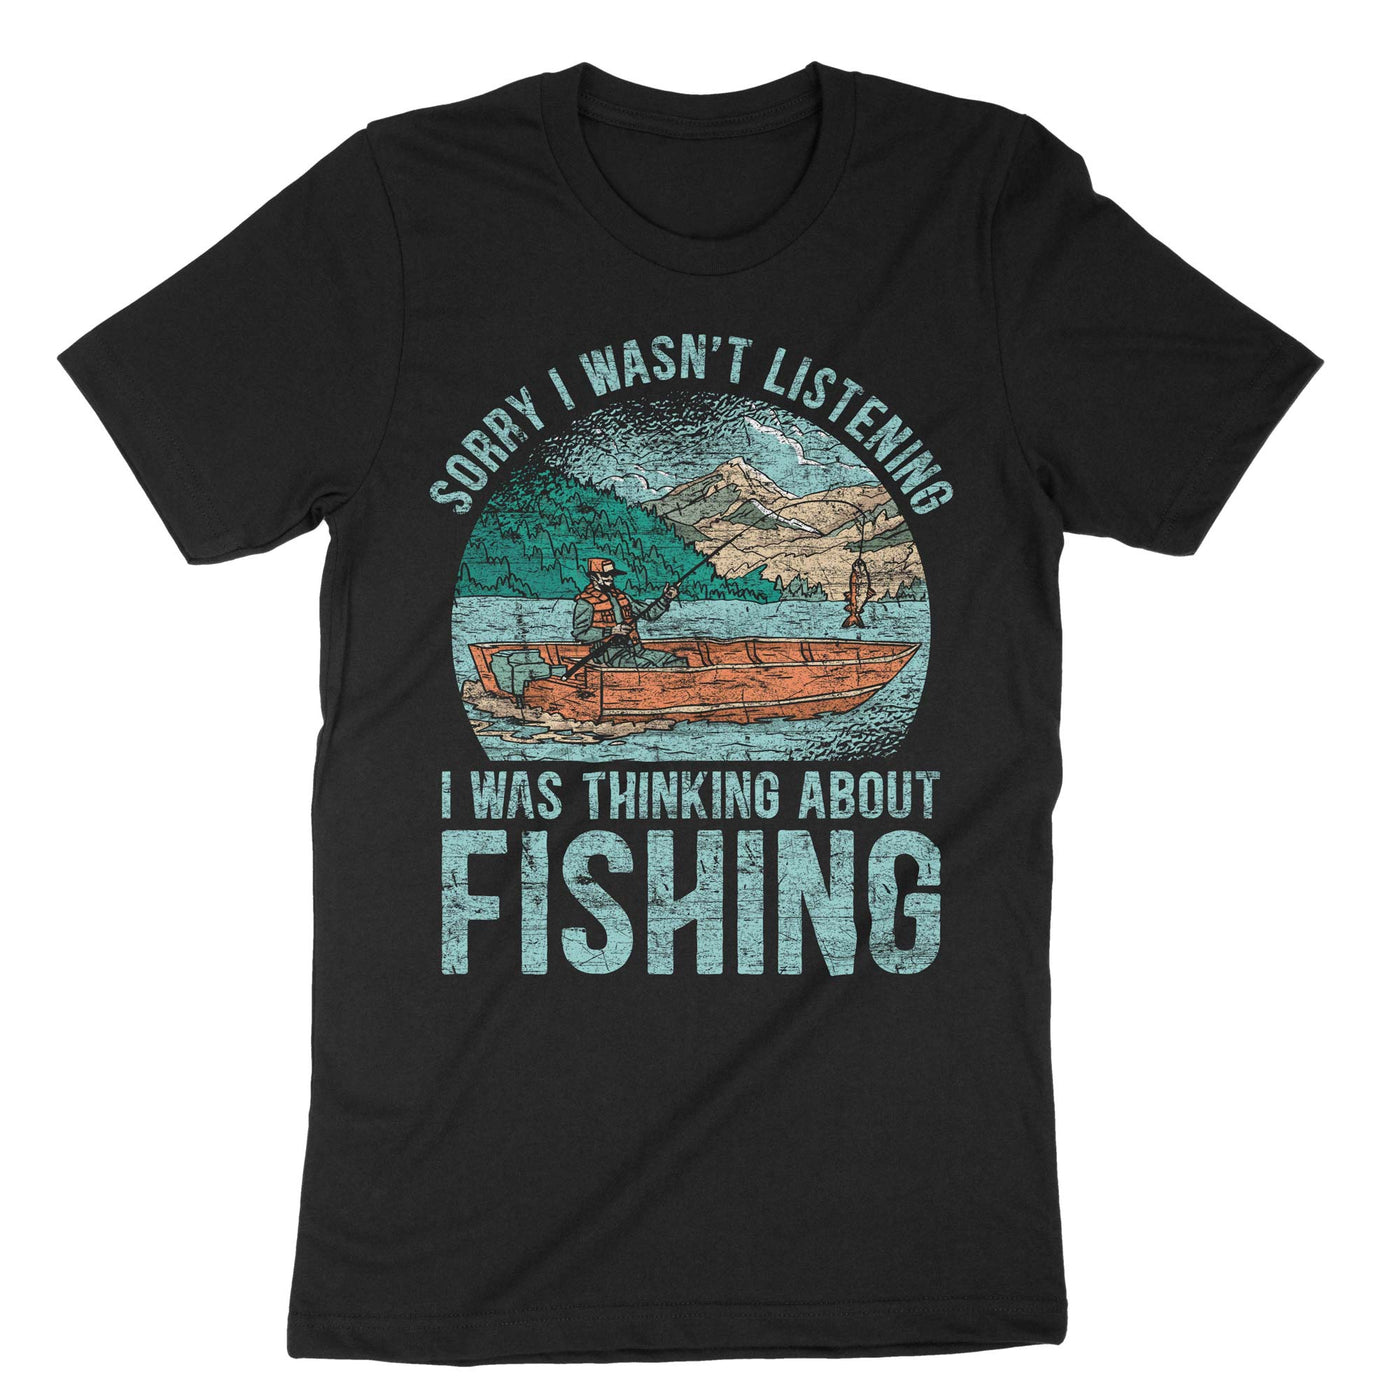 Black Sorry I Wasn't Listening I Was Thinking About Fishing T-Shirt#color_black